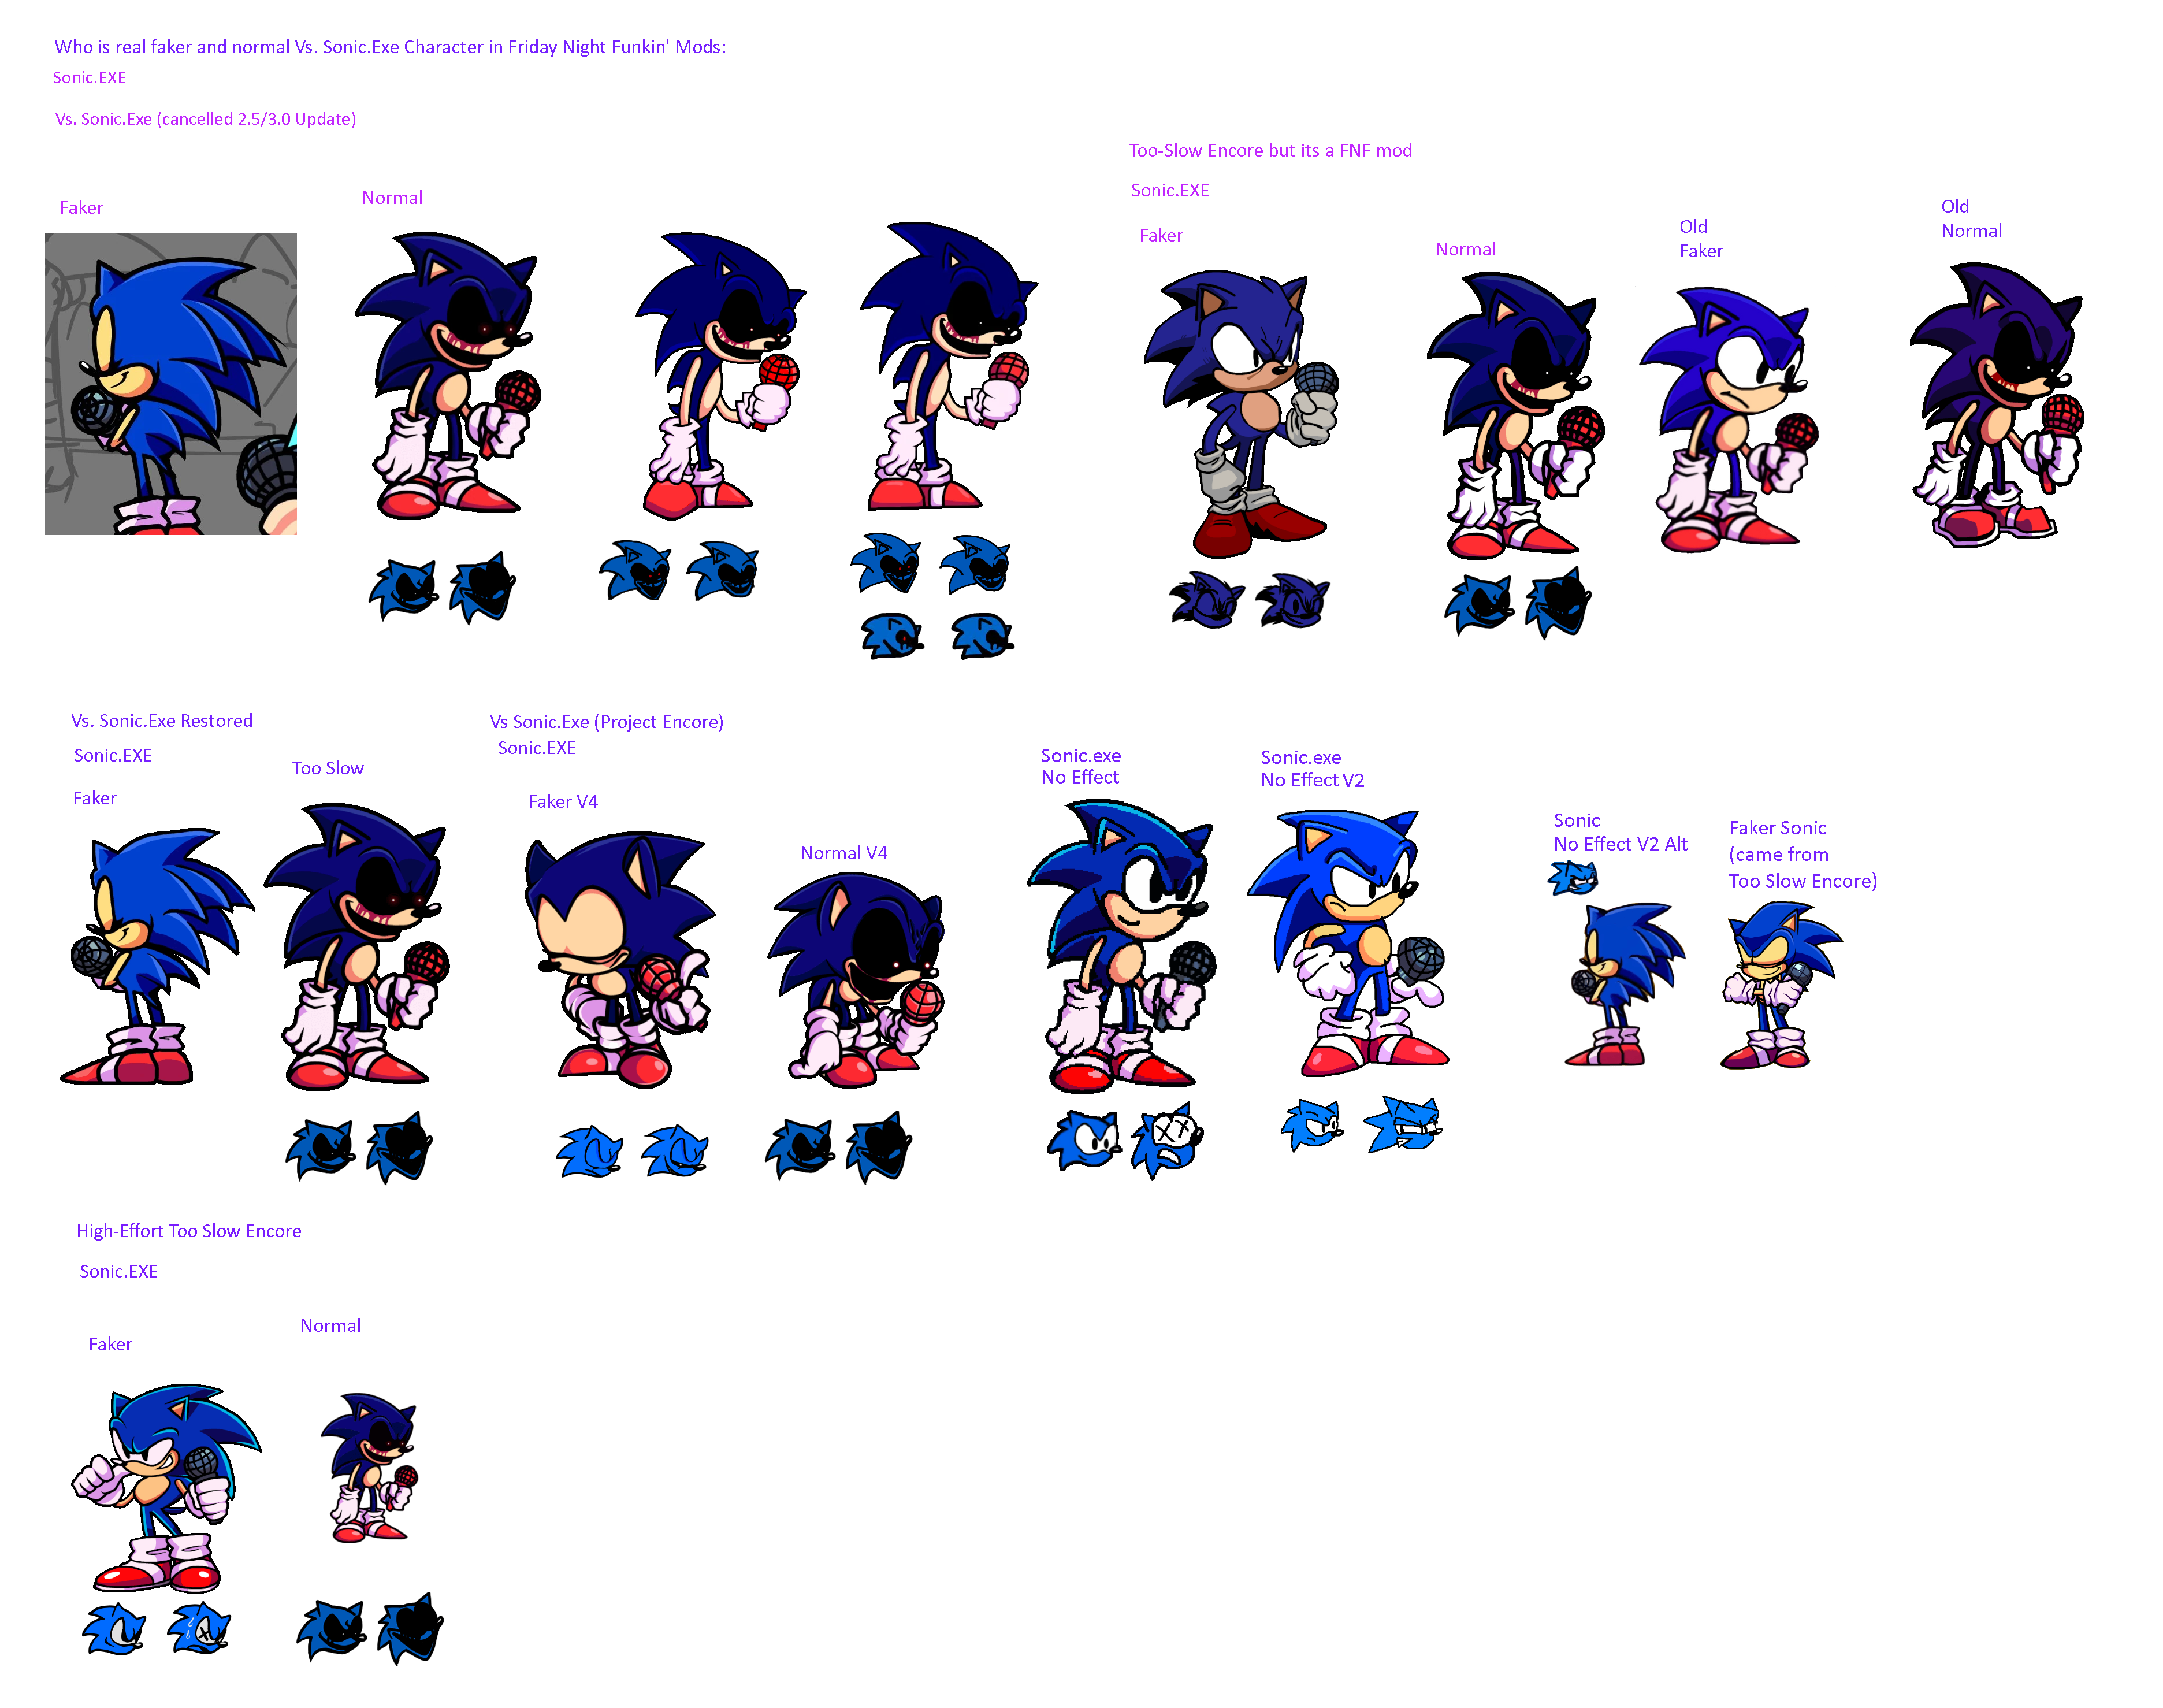 Who is real faker and normal Vs. Sonic.Exe Charact by Abbysek on DeviantArt